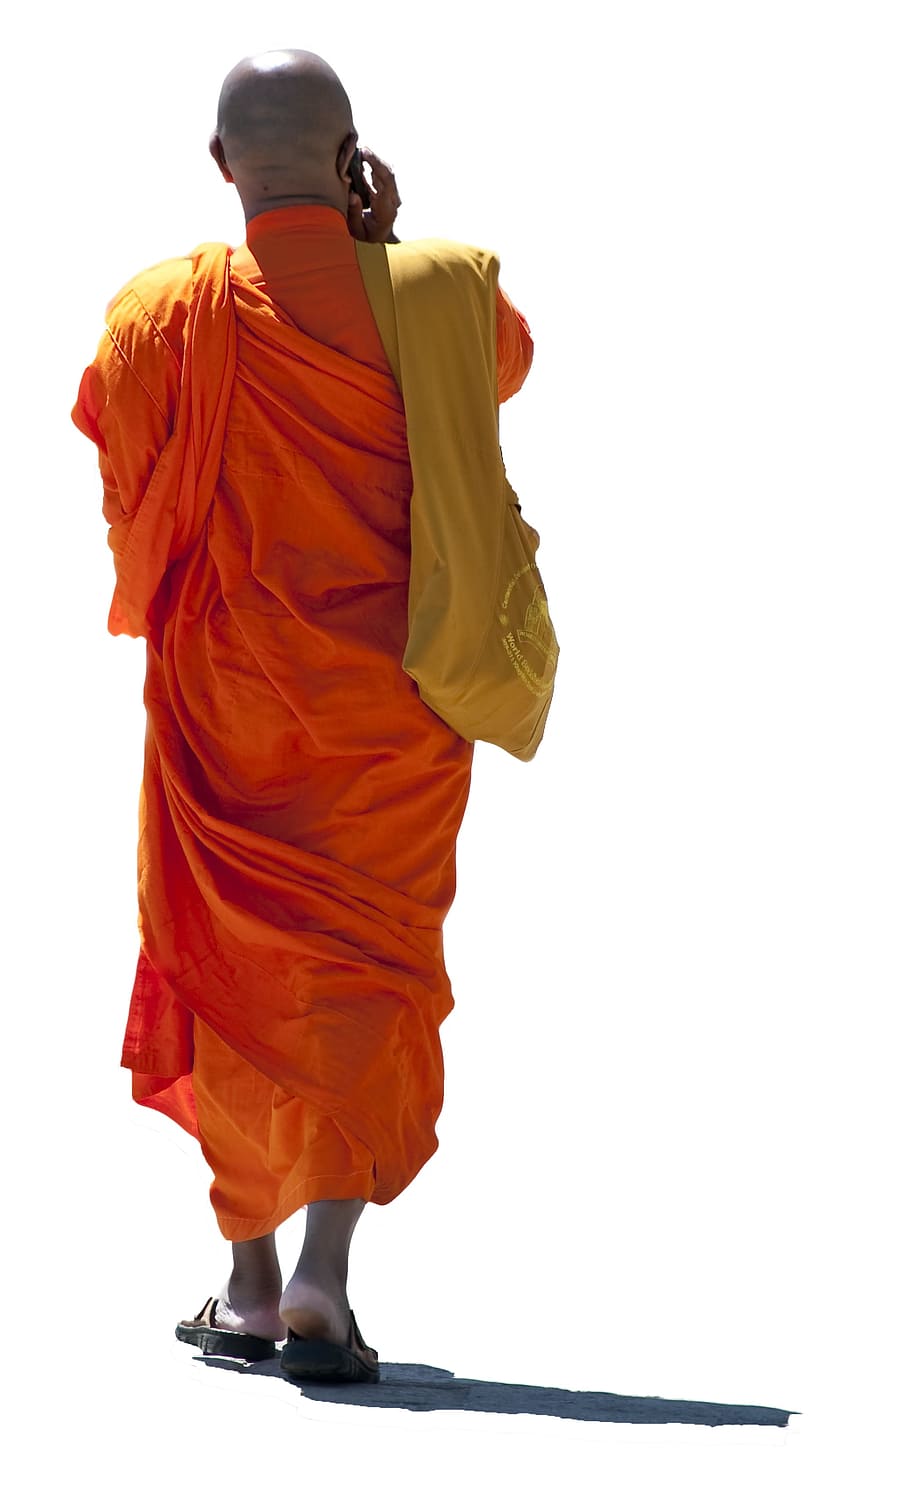 HD wallpaper: man in monk outfit standing close up photo, buddhist